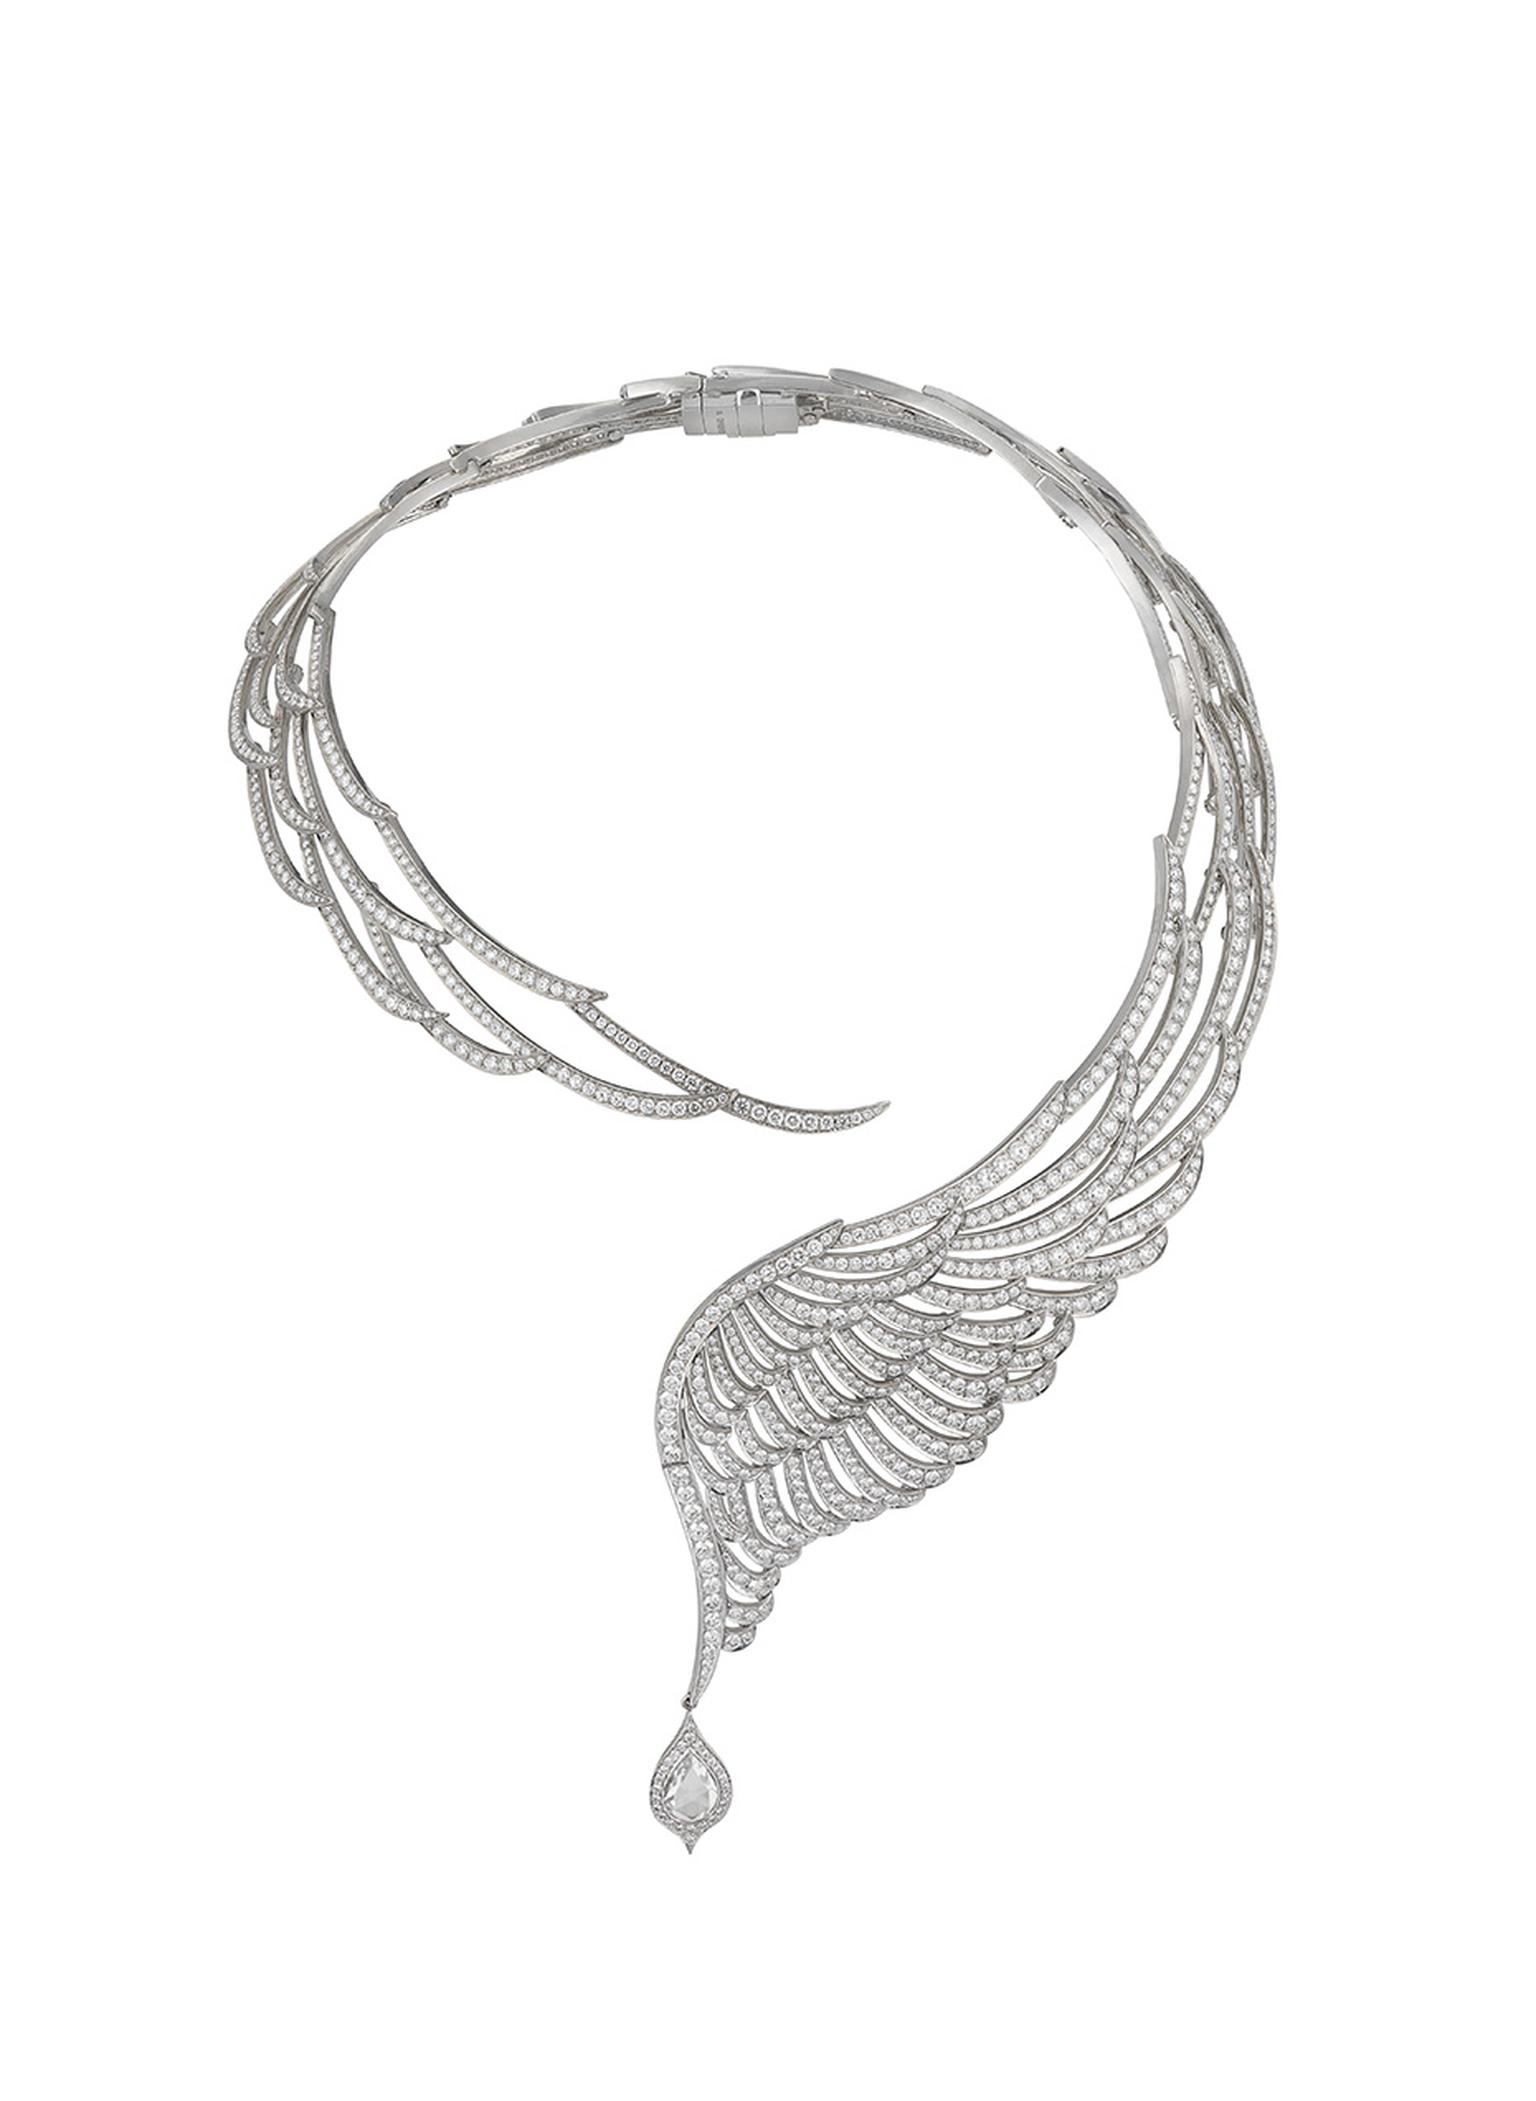 Garrard necklace with 40ct of diamonds, set in white gold, from the 10th Anniversary Wings High Jewellery collection